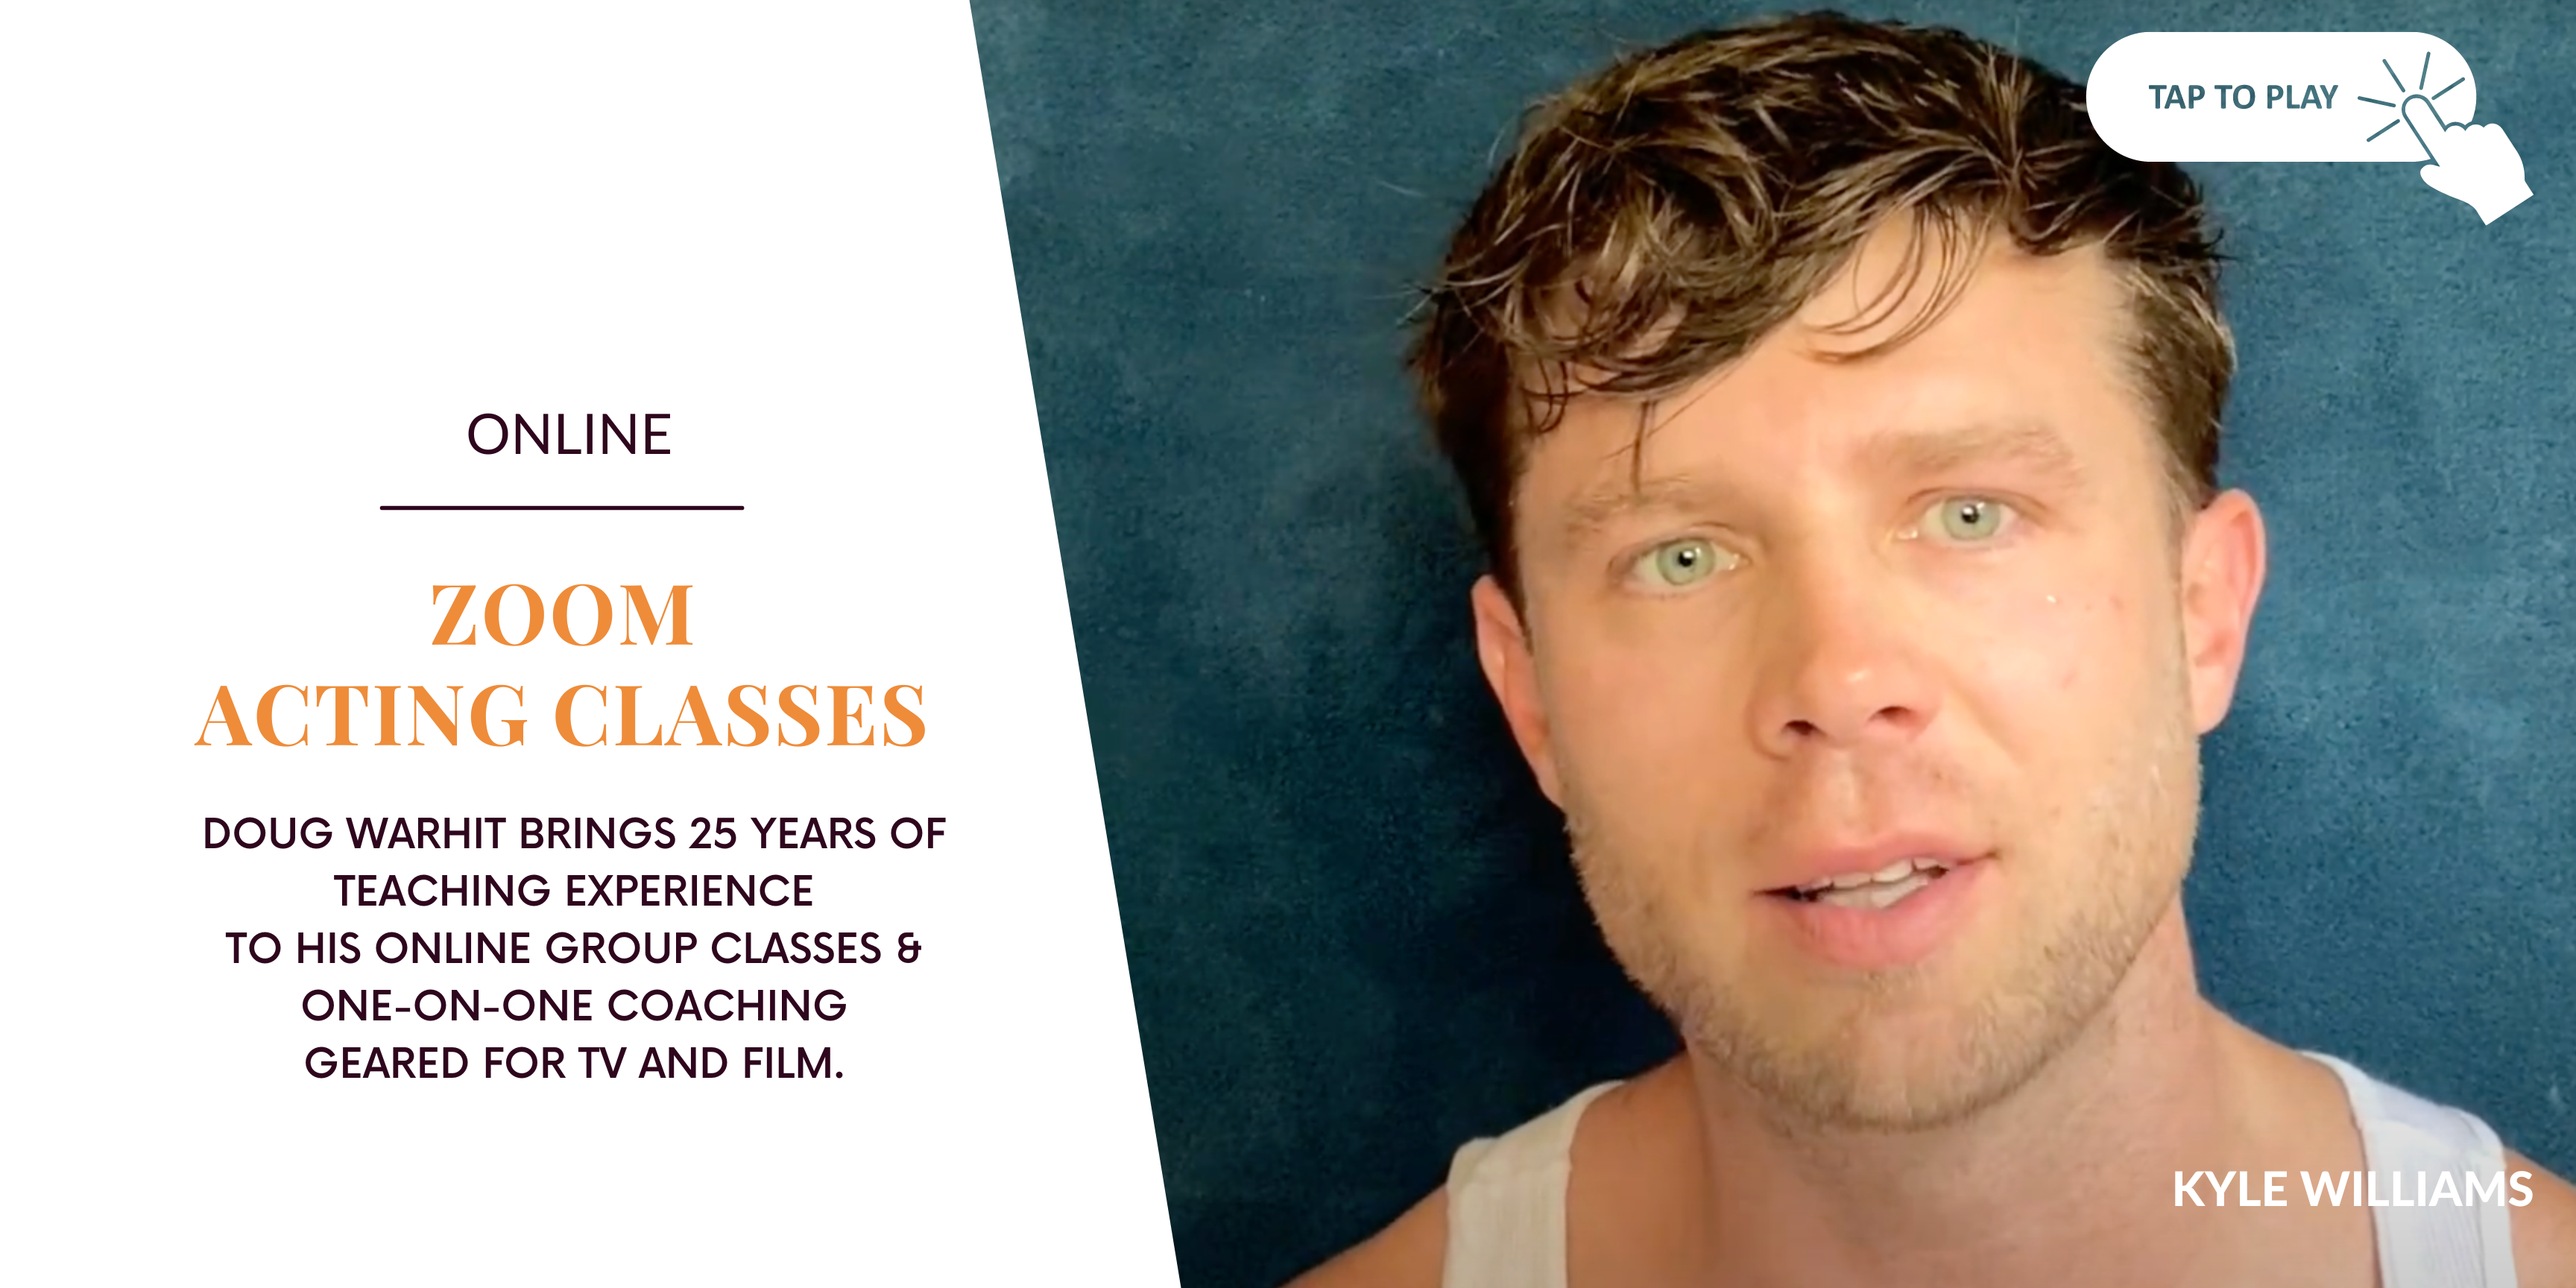 Online Acting Classes with Doug Warhit who brings 25 years of teaching experience to his online group classes and one on one coaching for tv and film